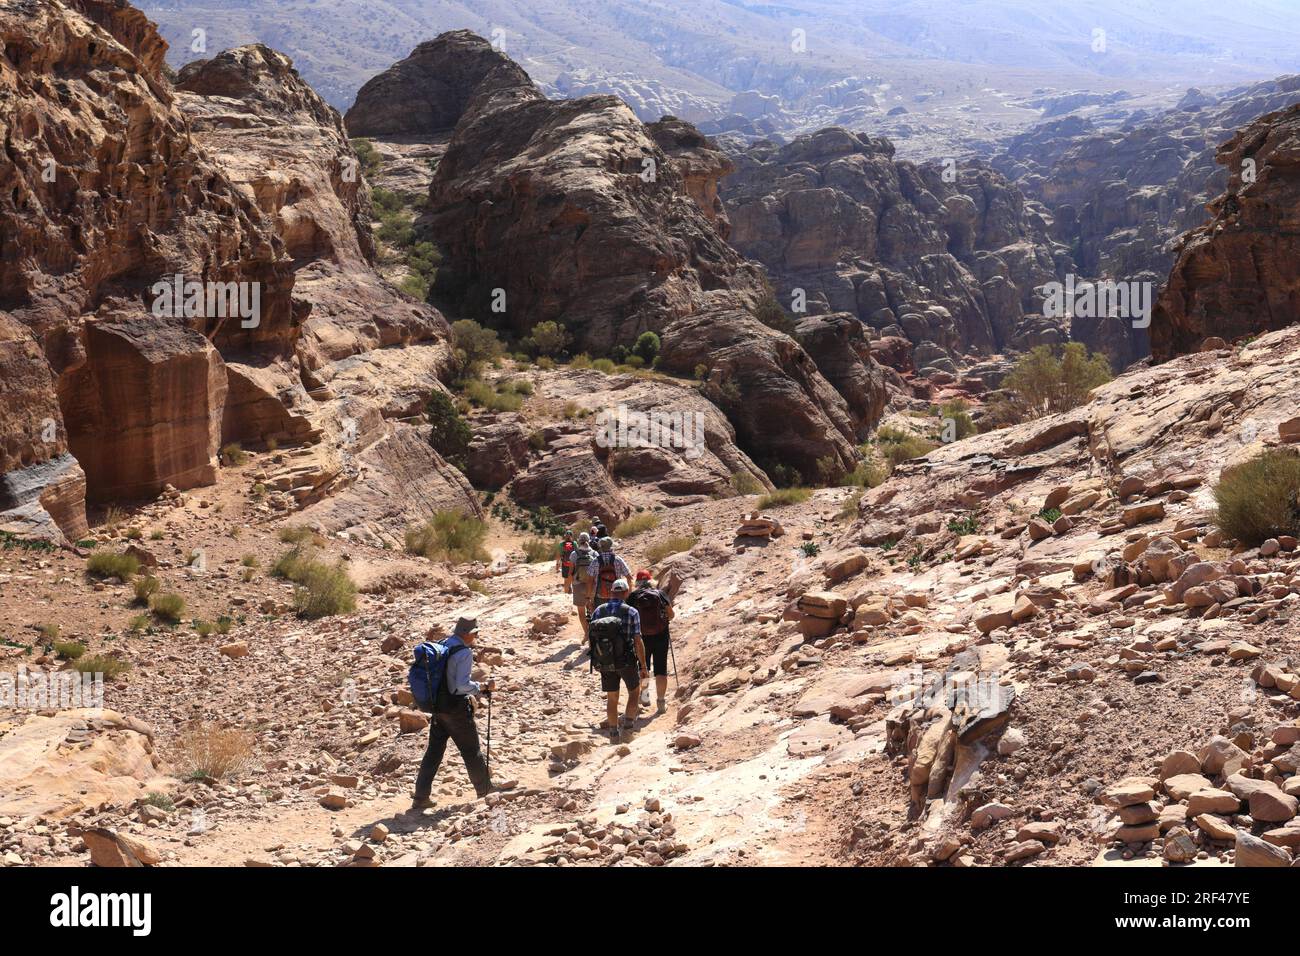 People on the Al Khubtha trail down to Petra city, UNESCO World Heritage Site, Wadi Musa, Jordan, Middle East Stock Photo